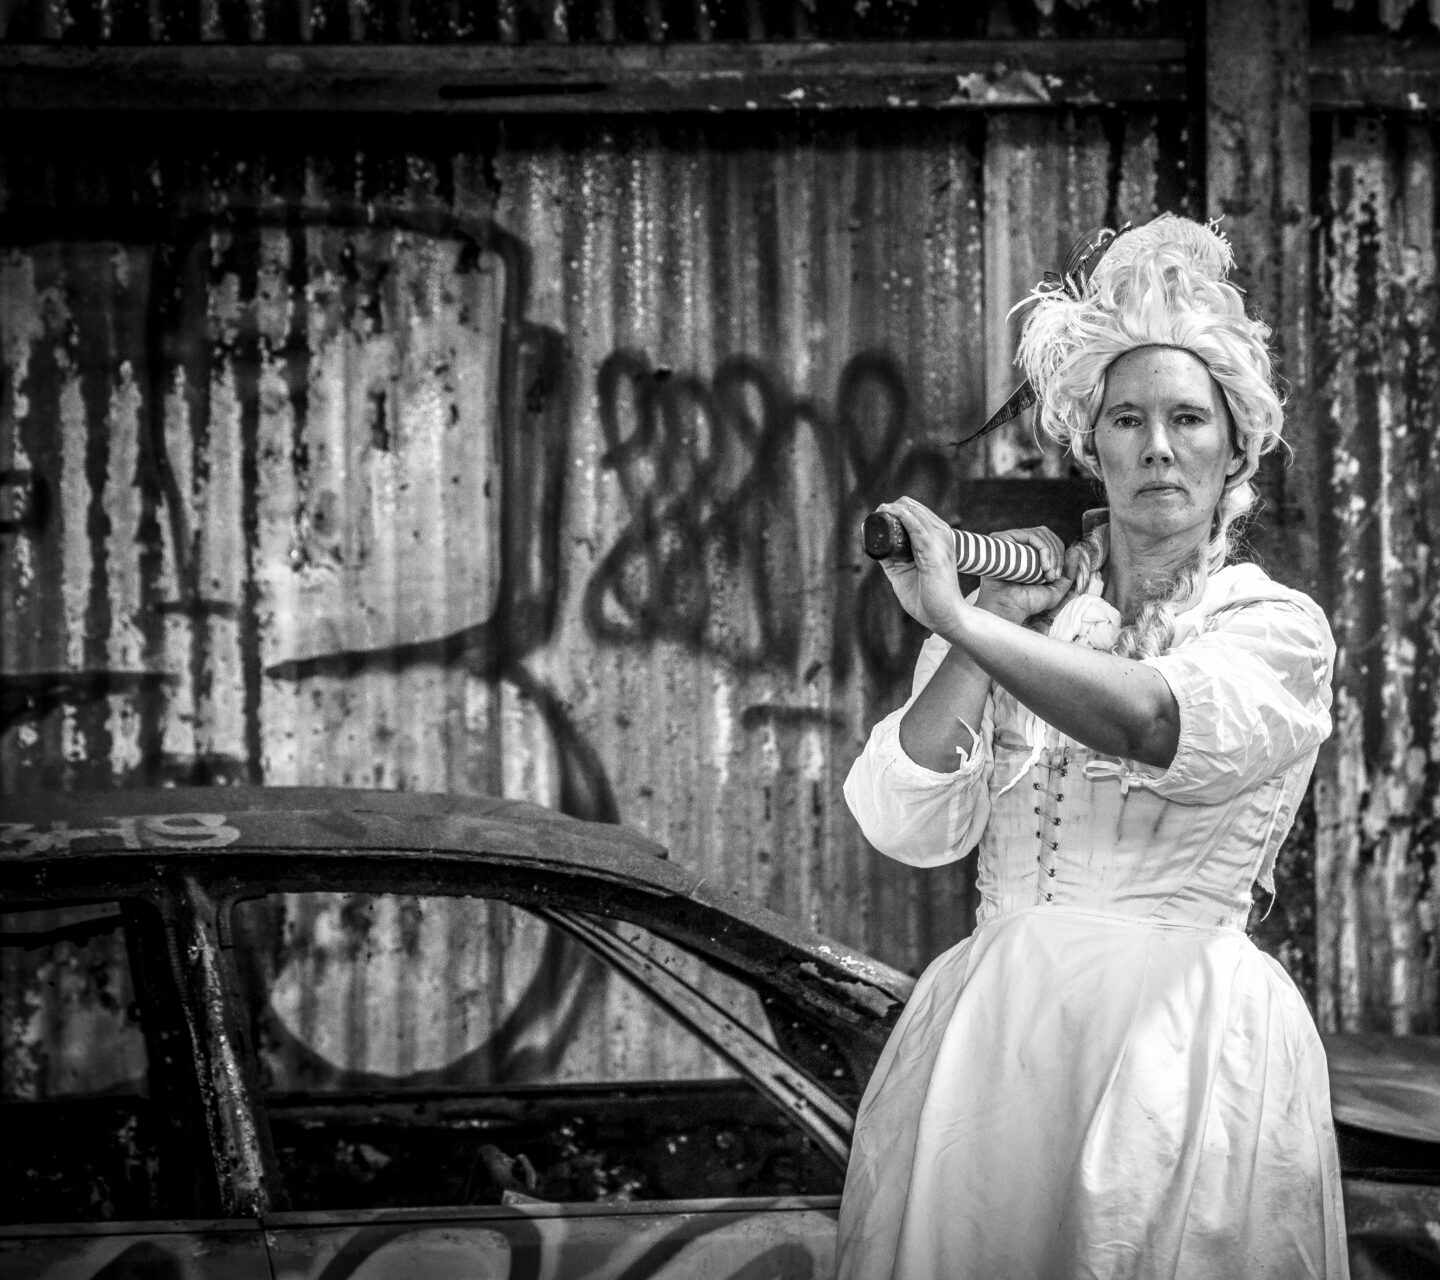 A black and white photograph of a woman in white period clothing, holding something with a long handle over her shoulder. She stands in front of a car and wall of corrugated metal, both covered in graffiti tags